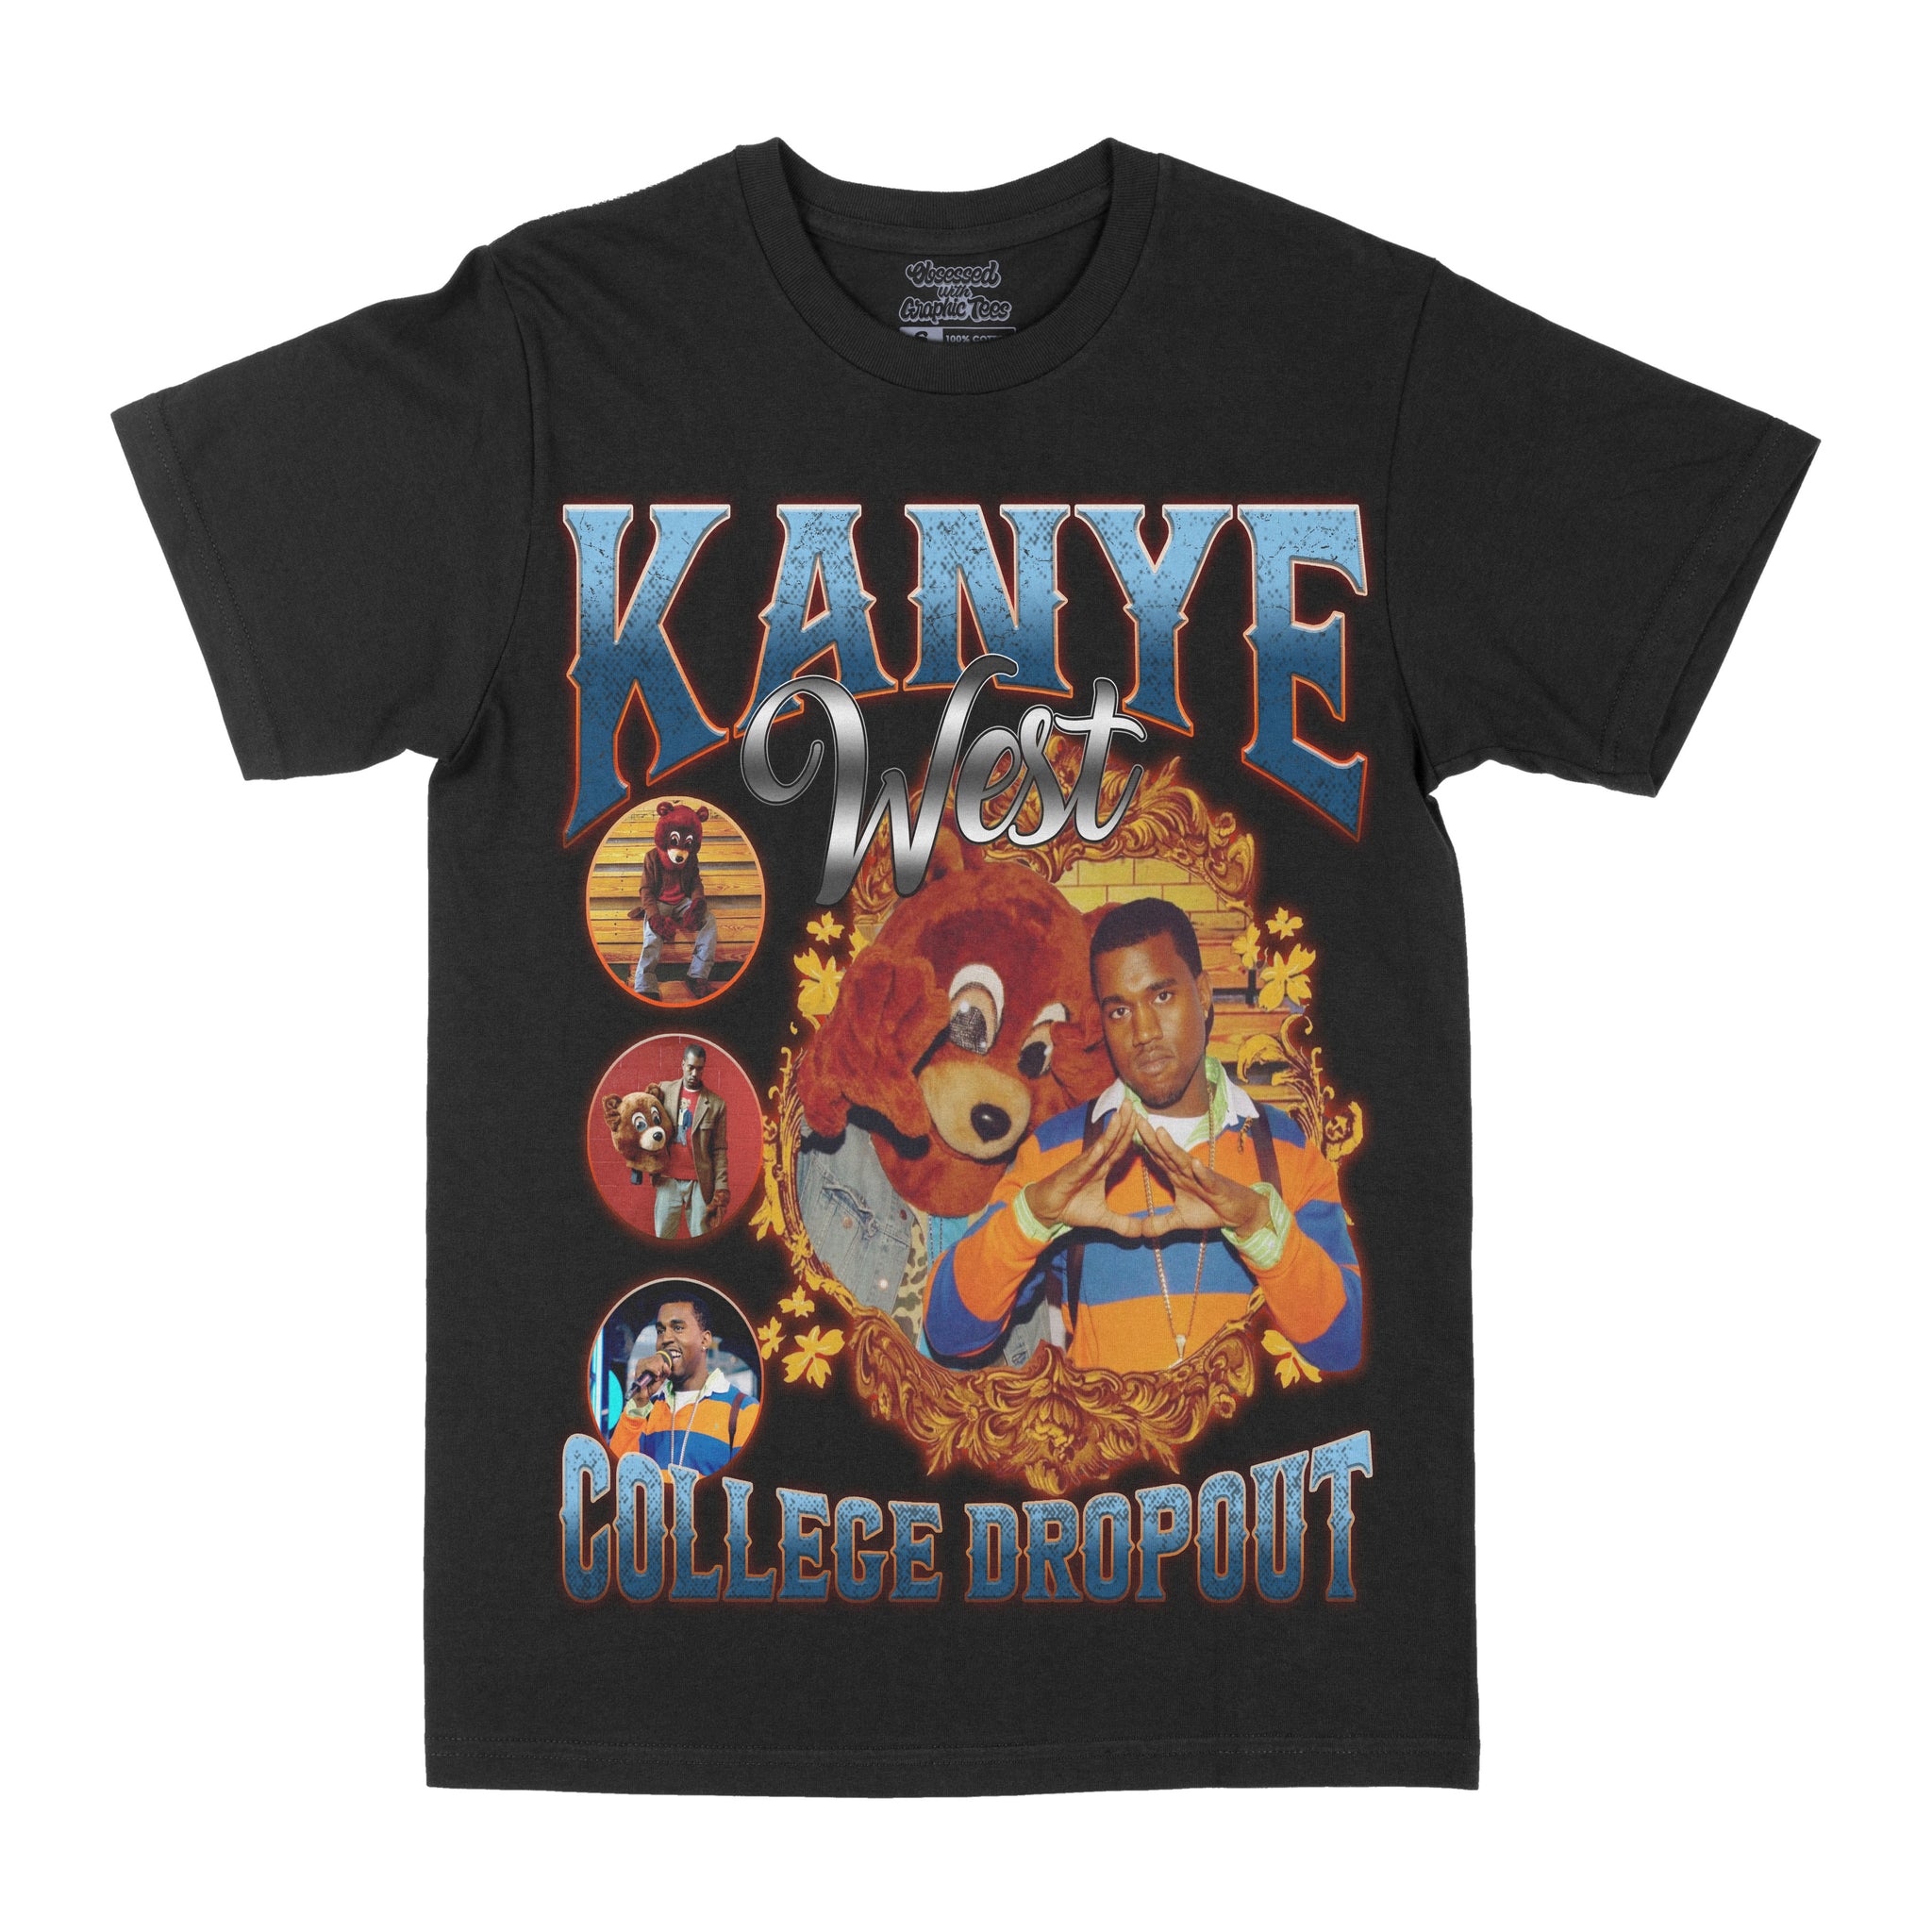 Kanye West The College IV Dropout Graphic Tee